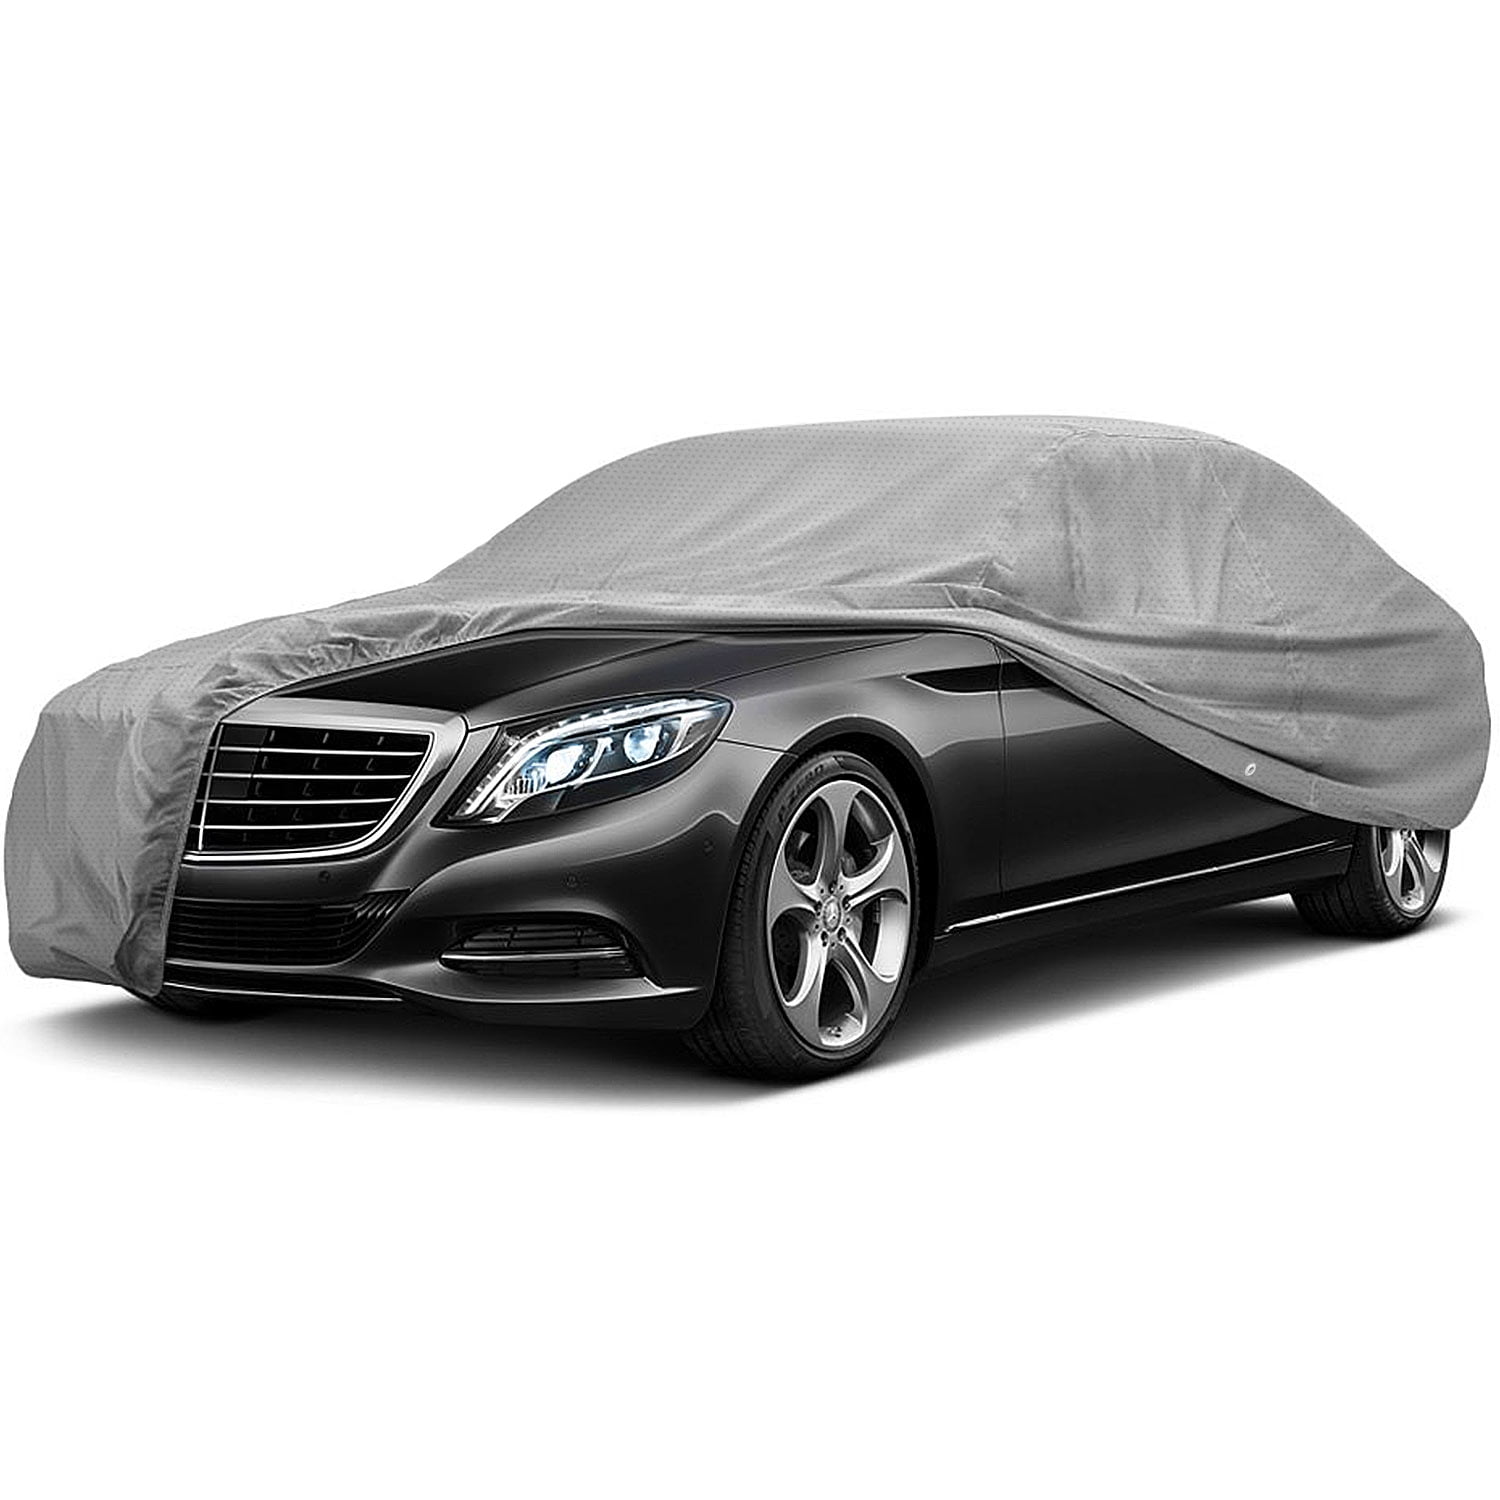  Mercedes S Class Breathable Indoor Outdoor Dust Cover